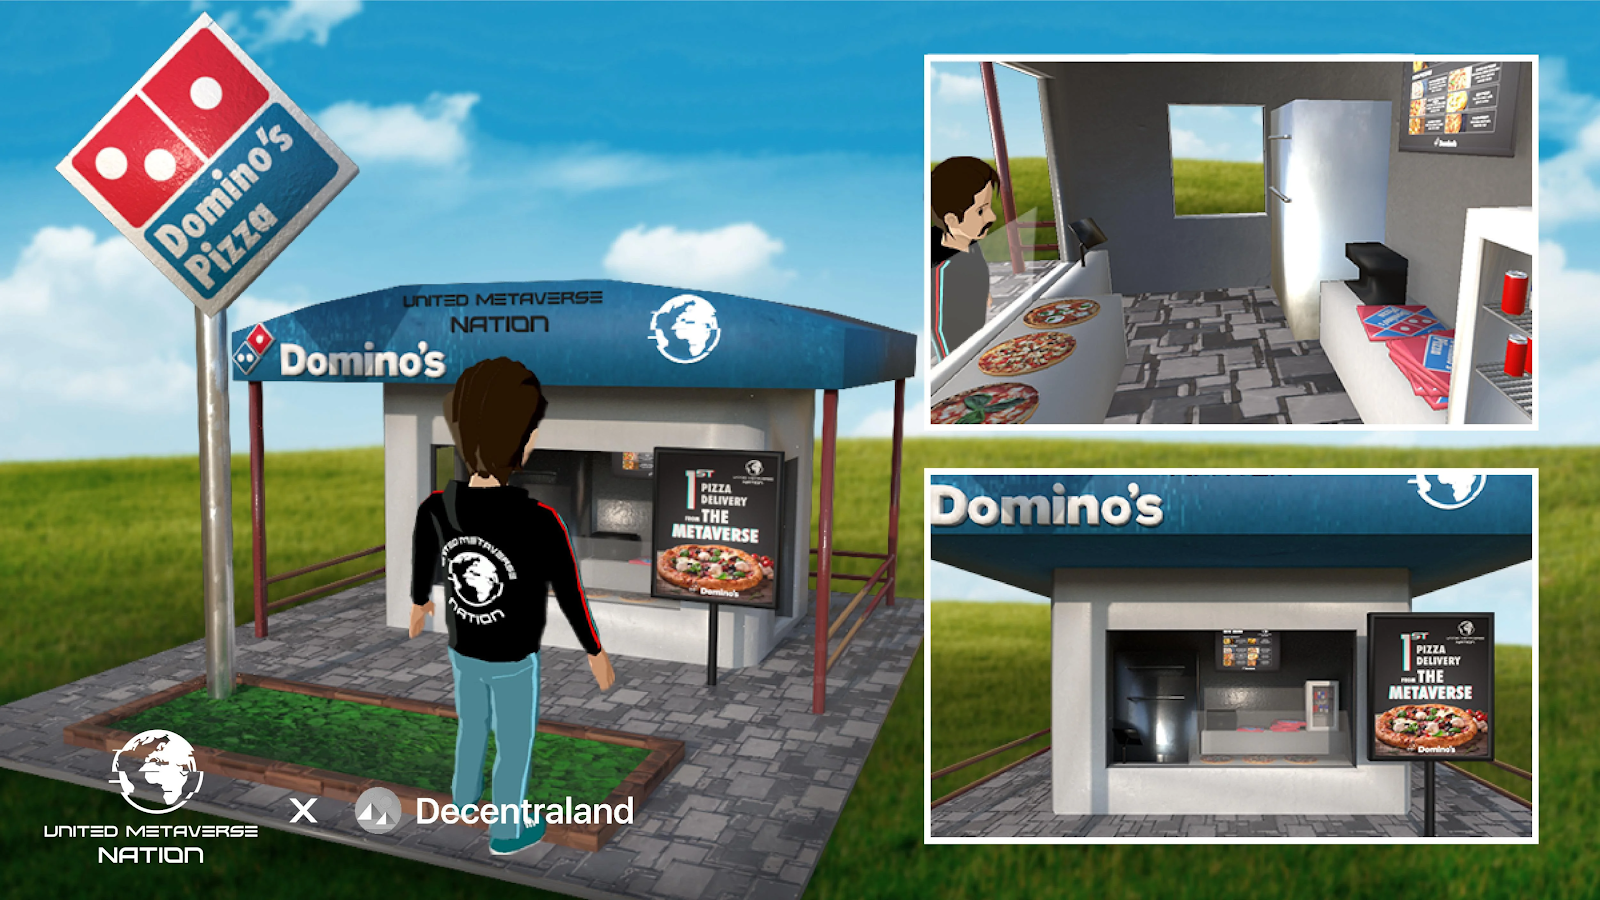 Purchasing real-world Domino's pizza from the metaverse, Decentraland. 